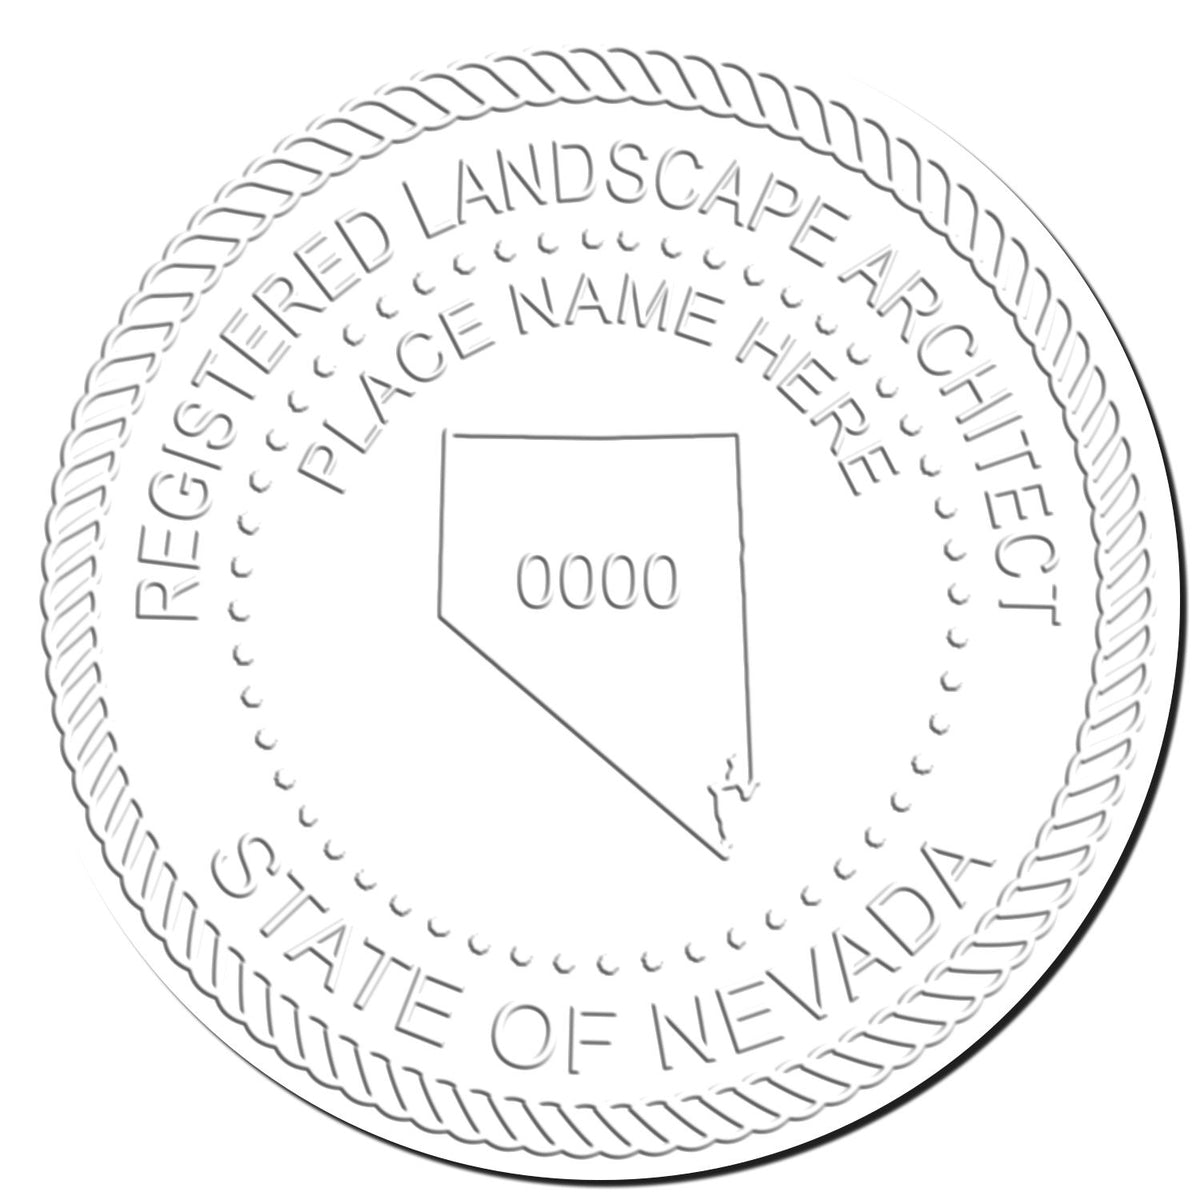 This paper is stamped with a sample imprint of the Hybrid Nevada Landscape Architect Seal, signifying its quality and reliability.